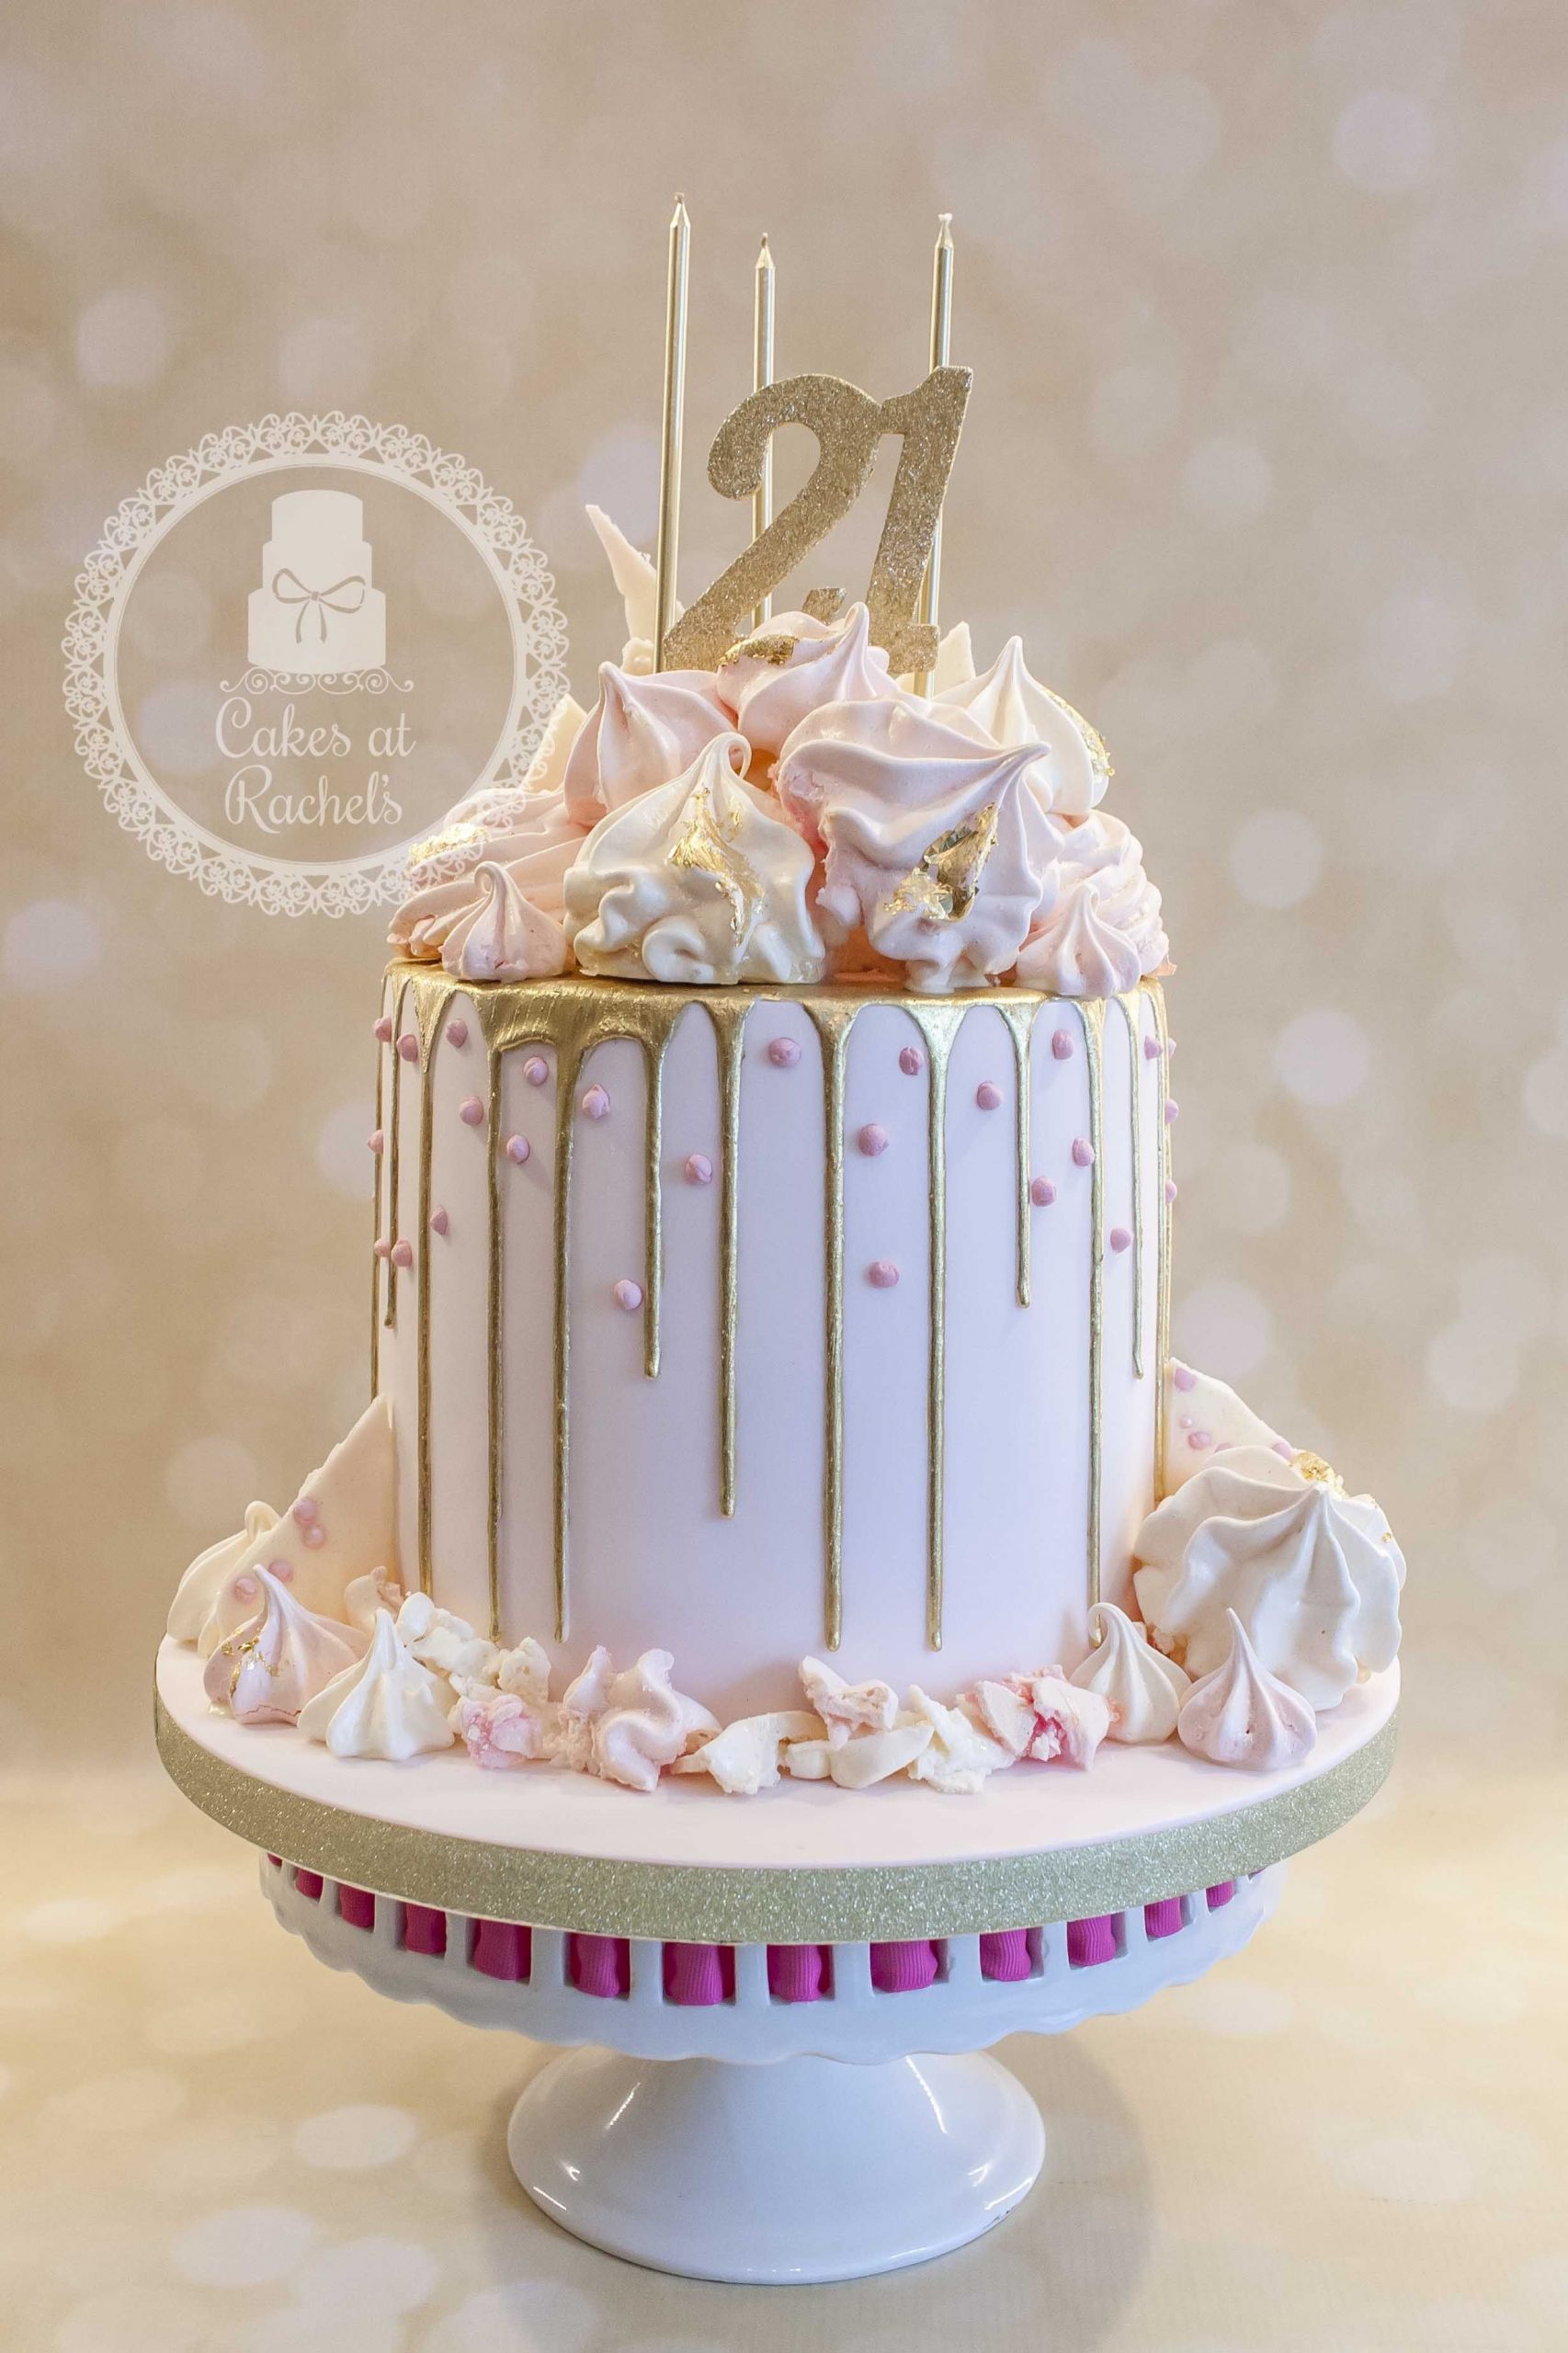 21st Birthday Cakes For Her
 Pastel pink and gold drip cake for Francesca s 21st